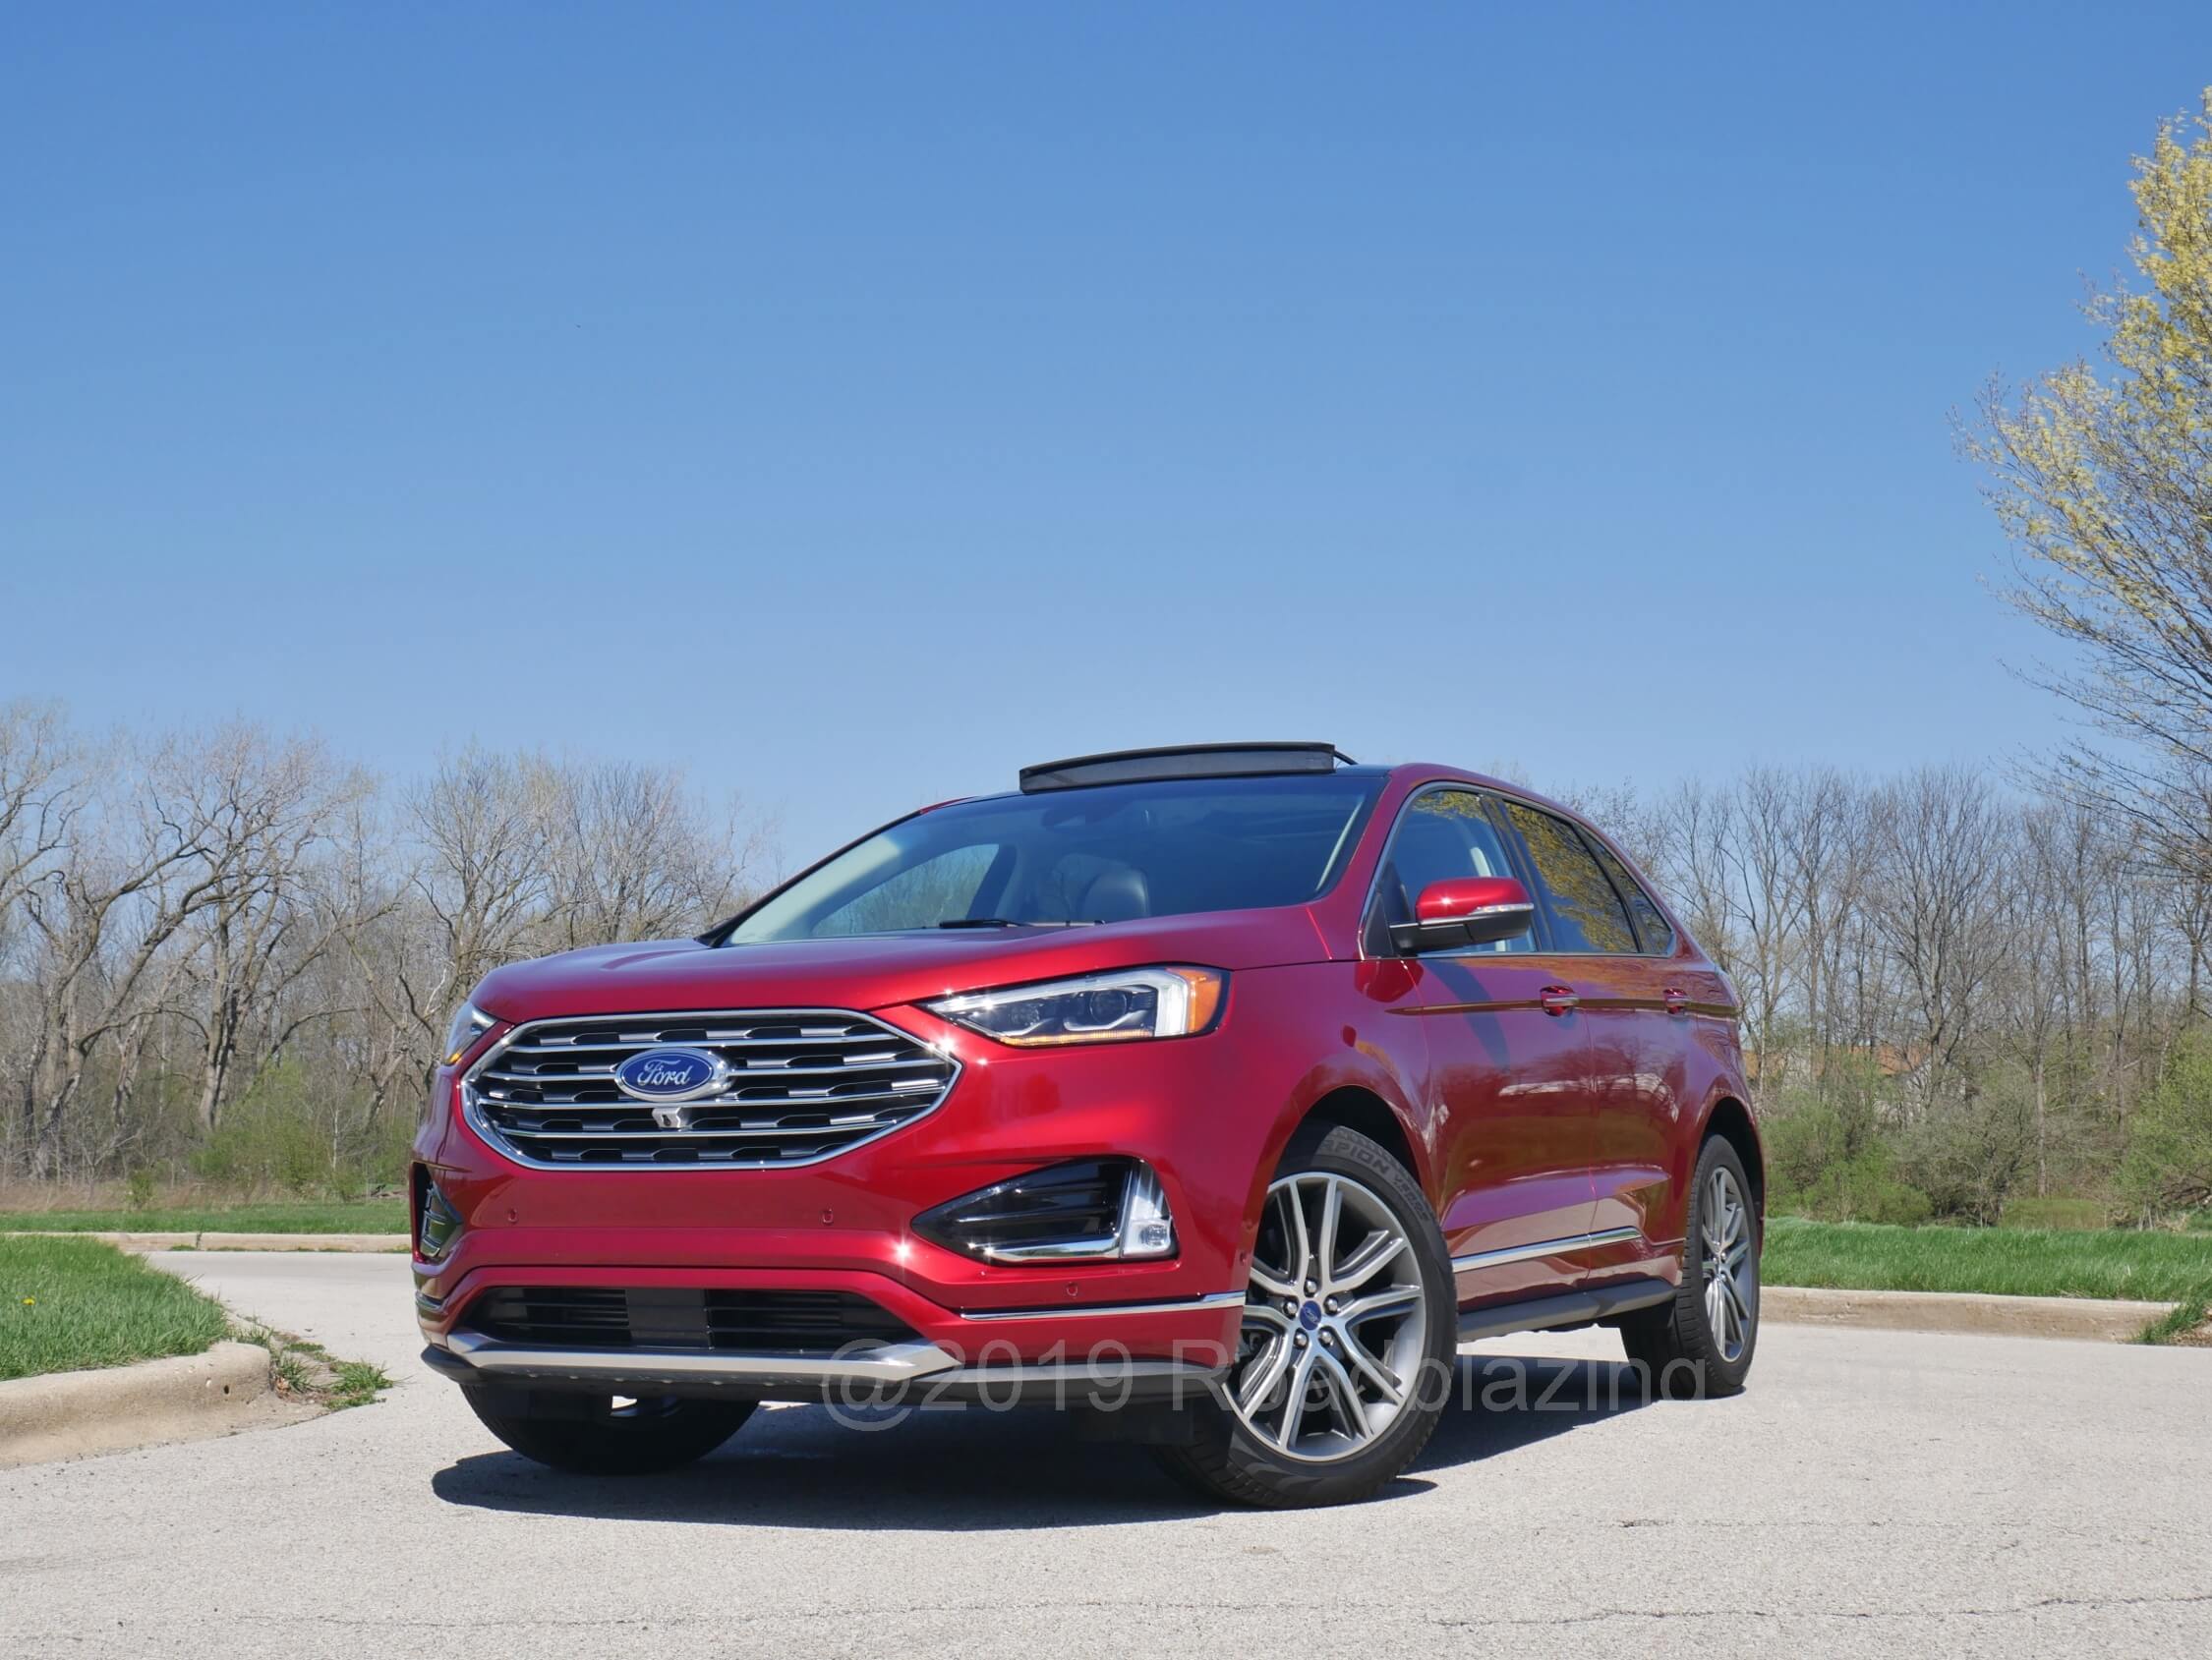 2019 Ford Edge Titanium AWD: Usual suspects in mid-cycle refresh = cinched grille, tweezed lights, bolder front lower corner recesses, simulated skid plates and more chrome